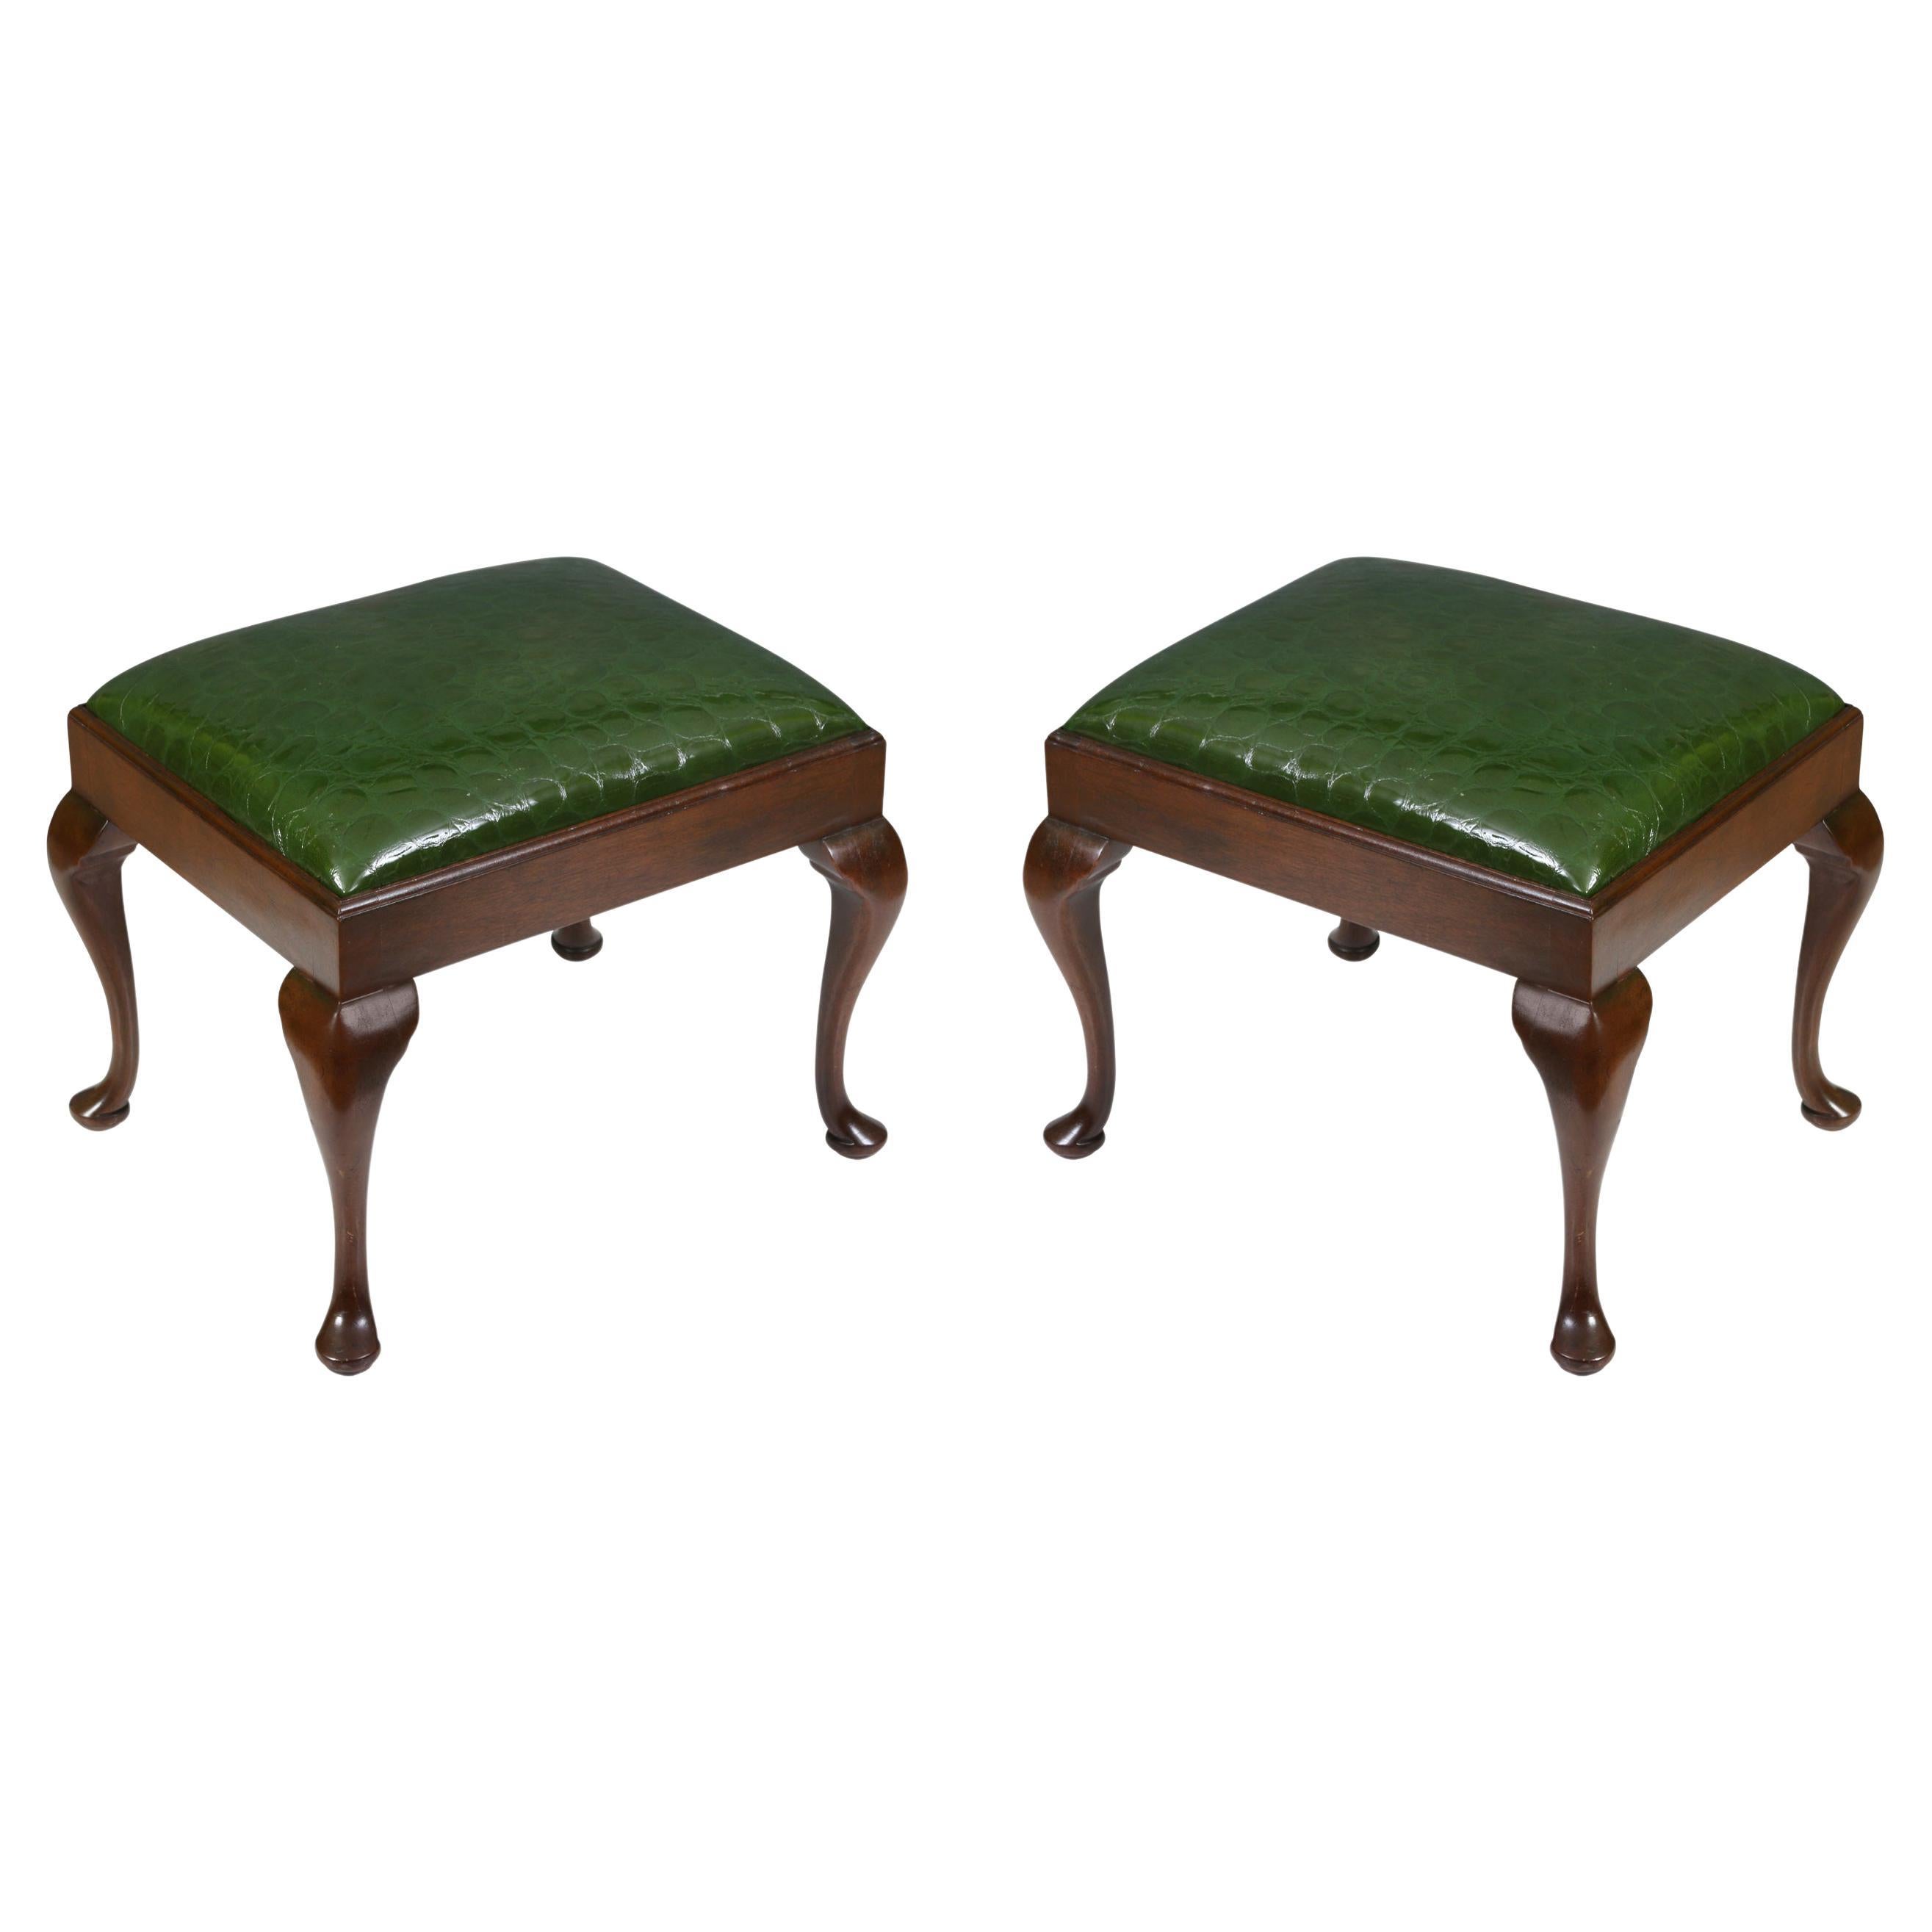 A Pair of Queen Anne Style Walnut Benches For Sale